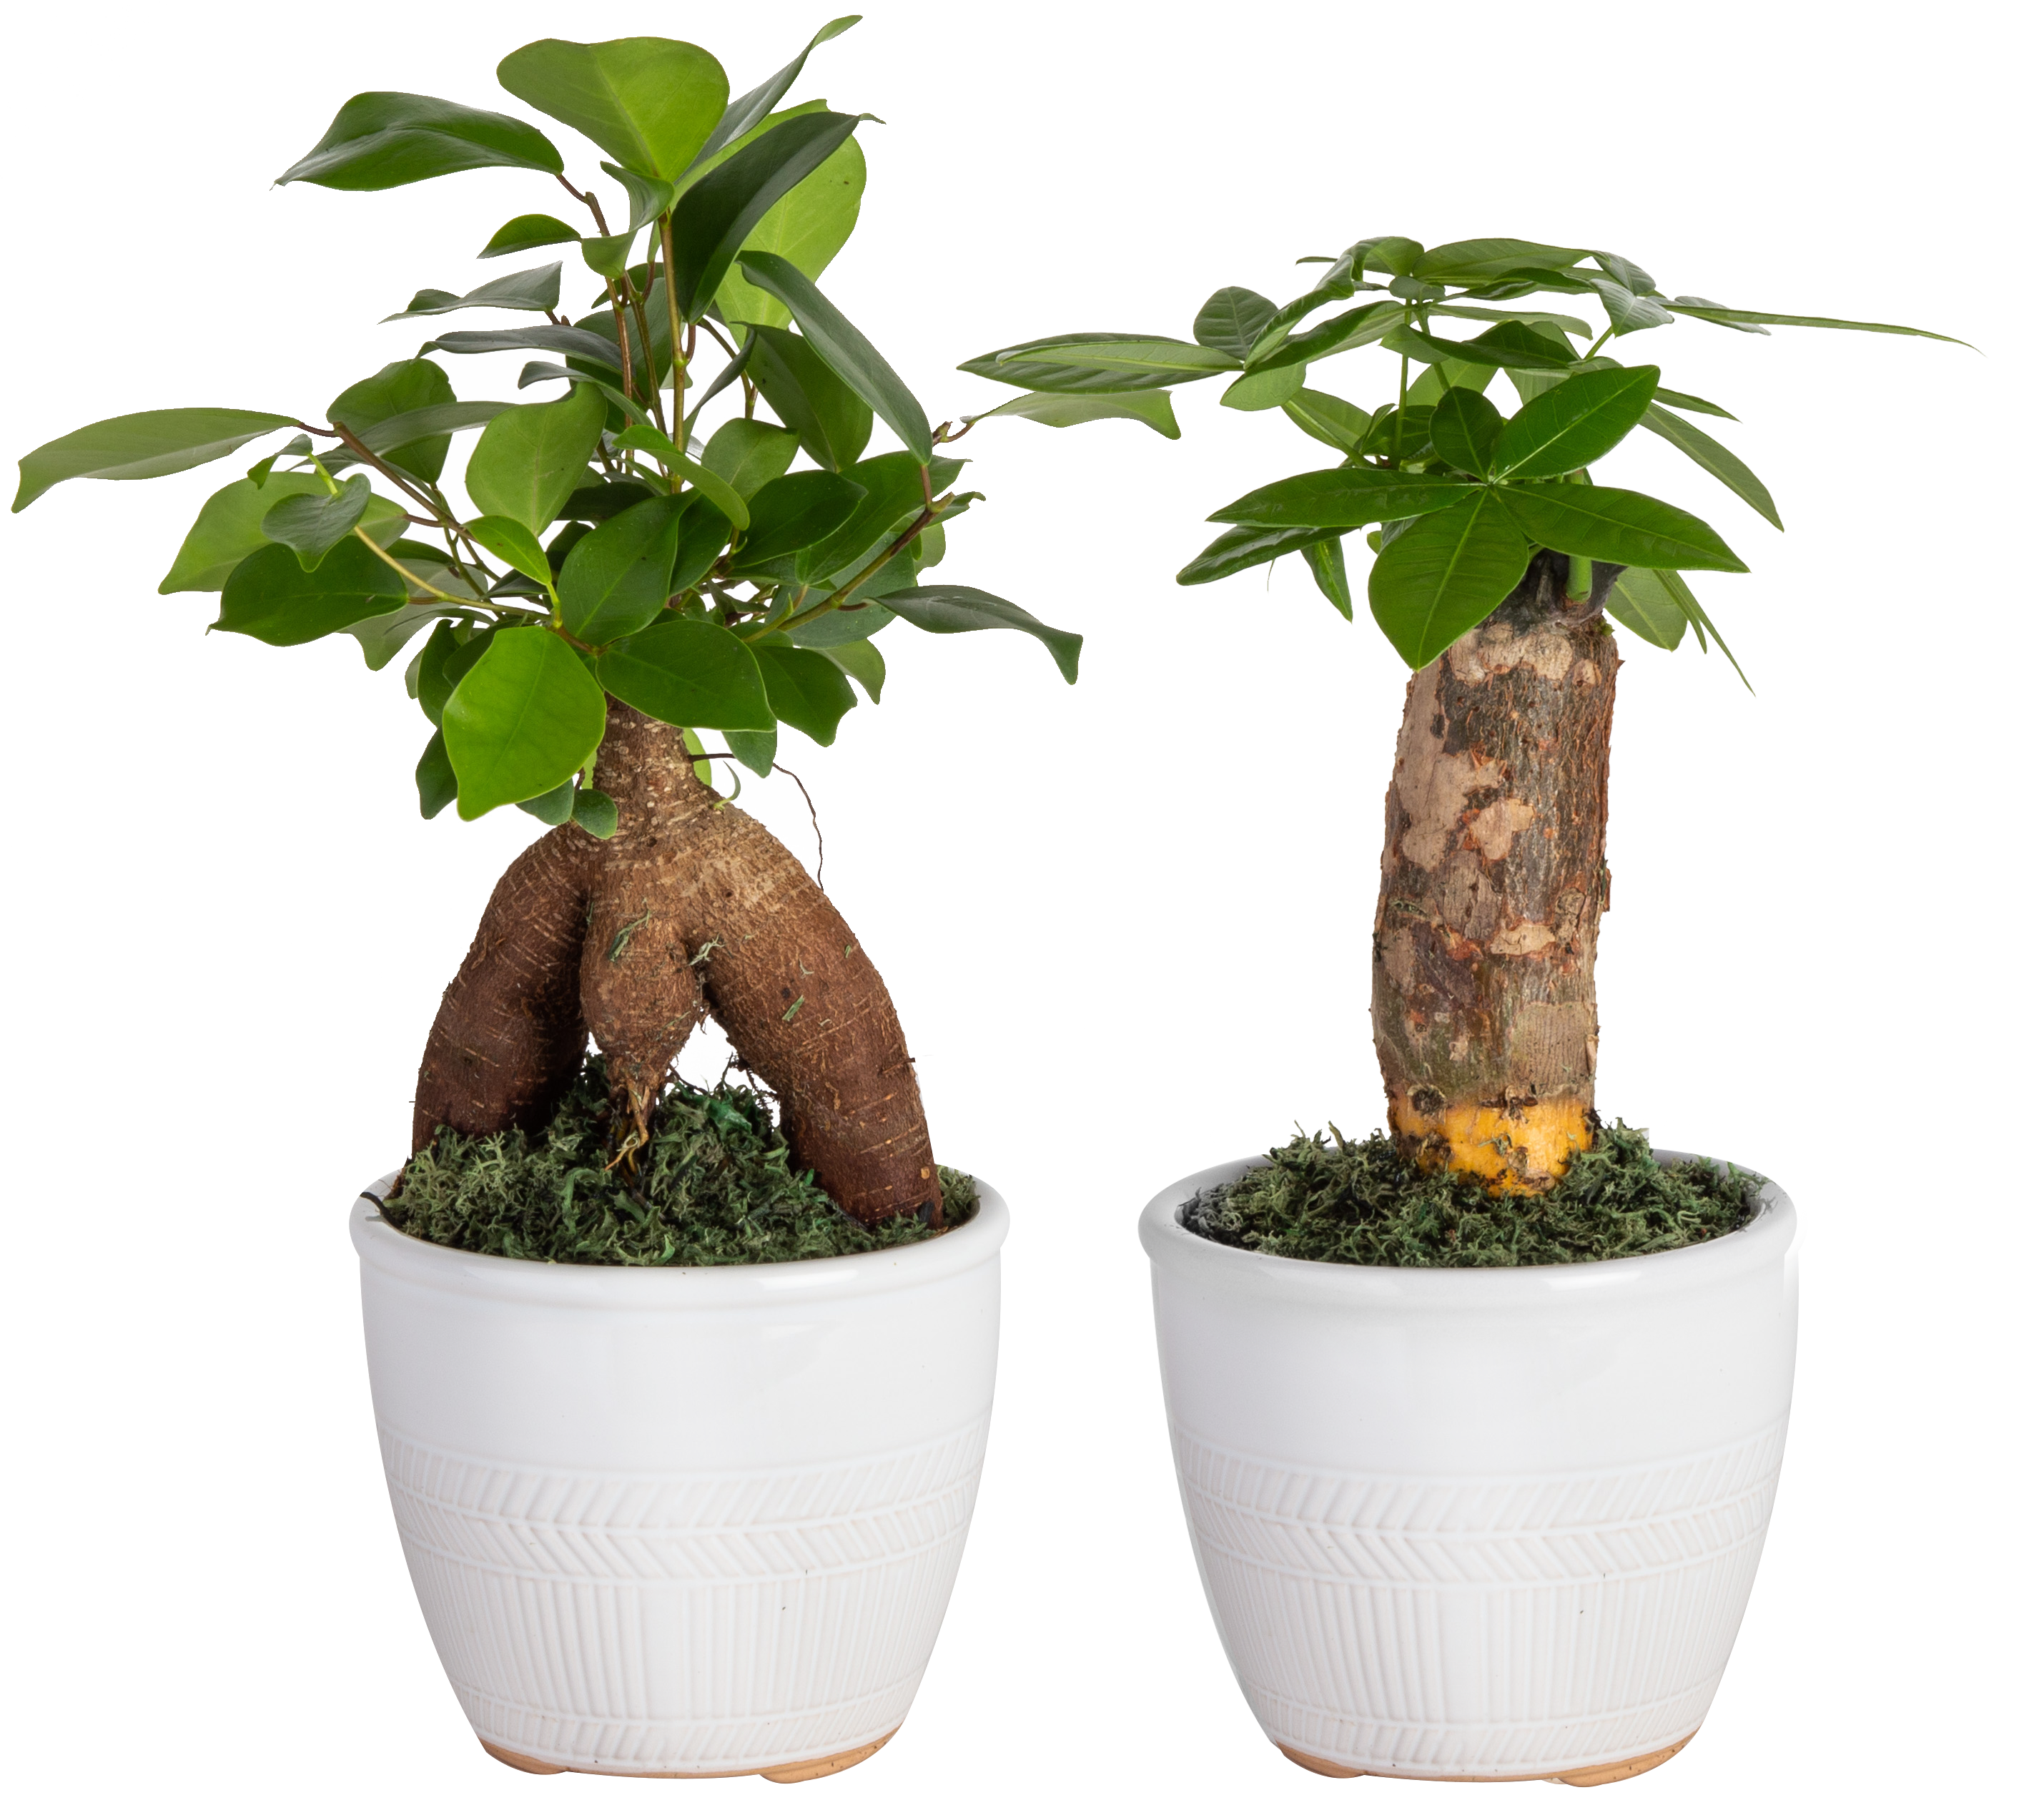 Costa Farms and in the 2-Pack department Ficus in 5-in Planter Stump Plants Plant Bonsai House Ginseng House at Pachira